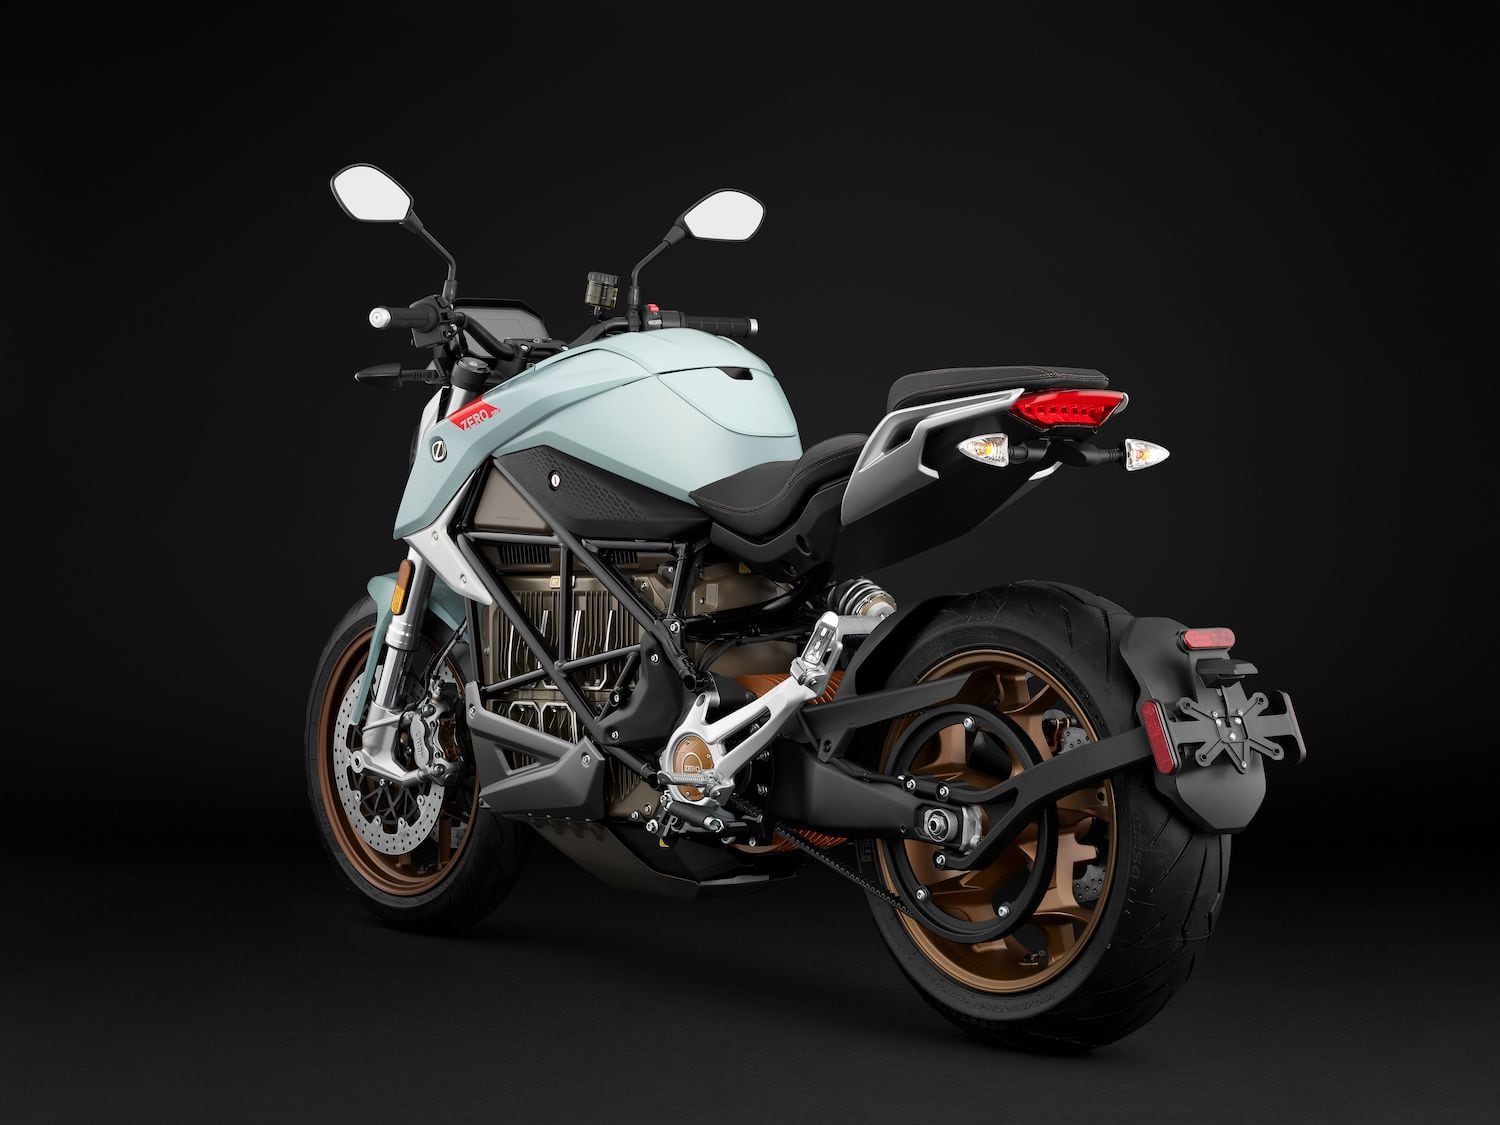 The current Zero SR/F has a one-speed transmission and no clutch lever, typical of most electric motorcycles.